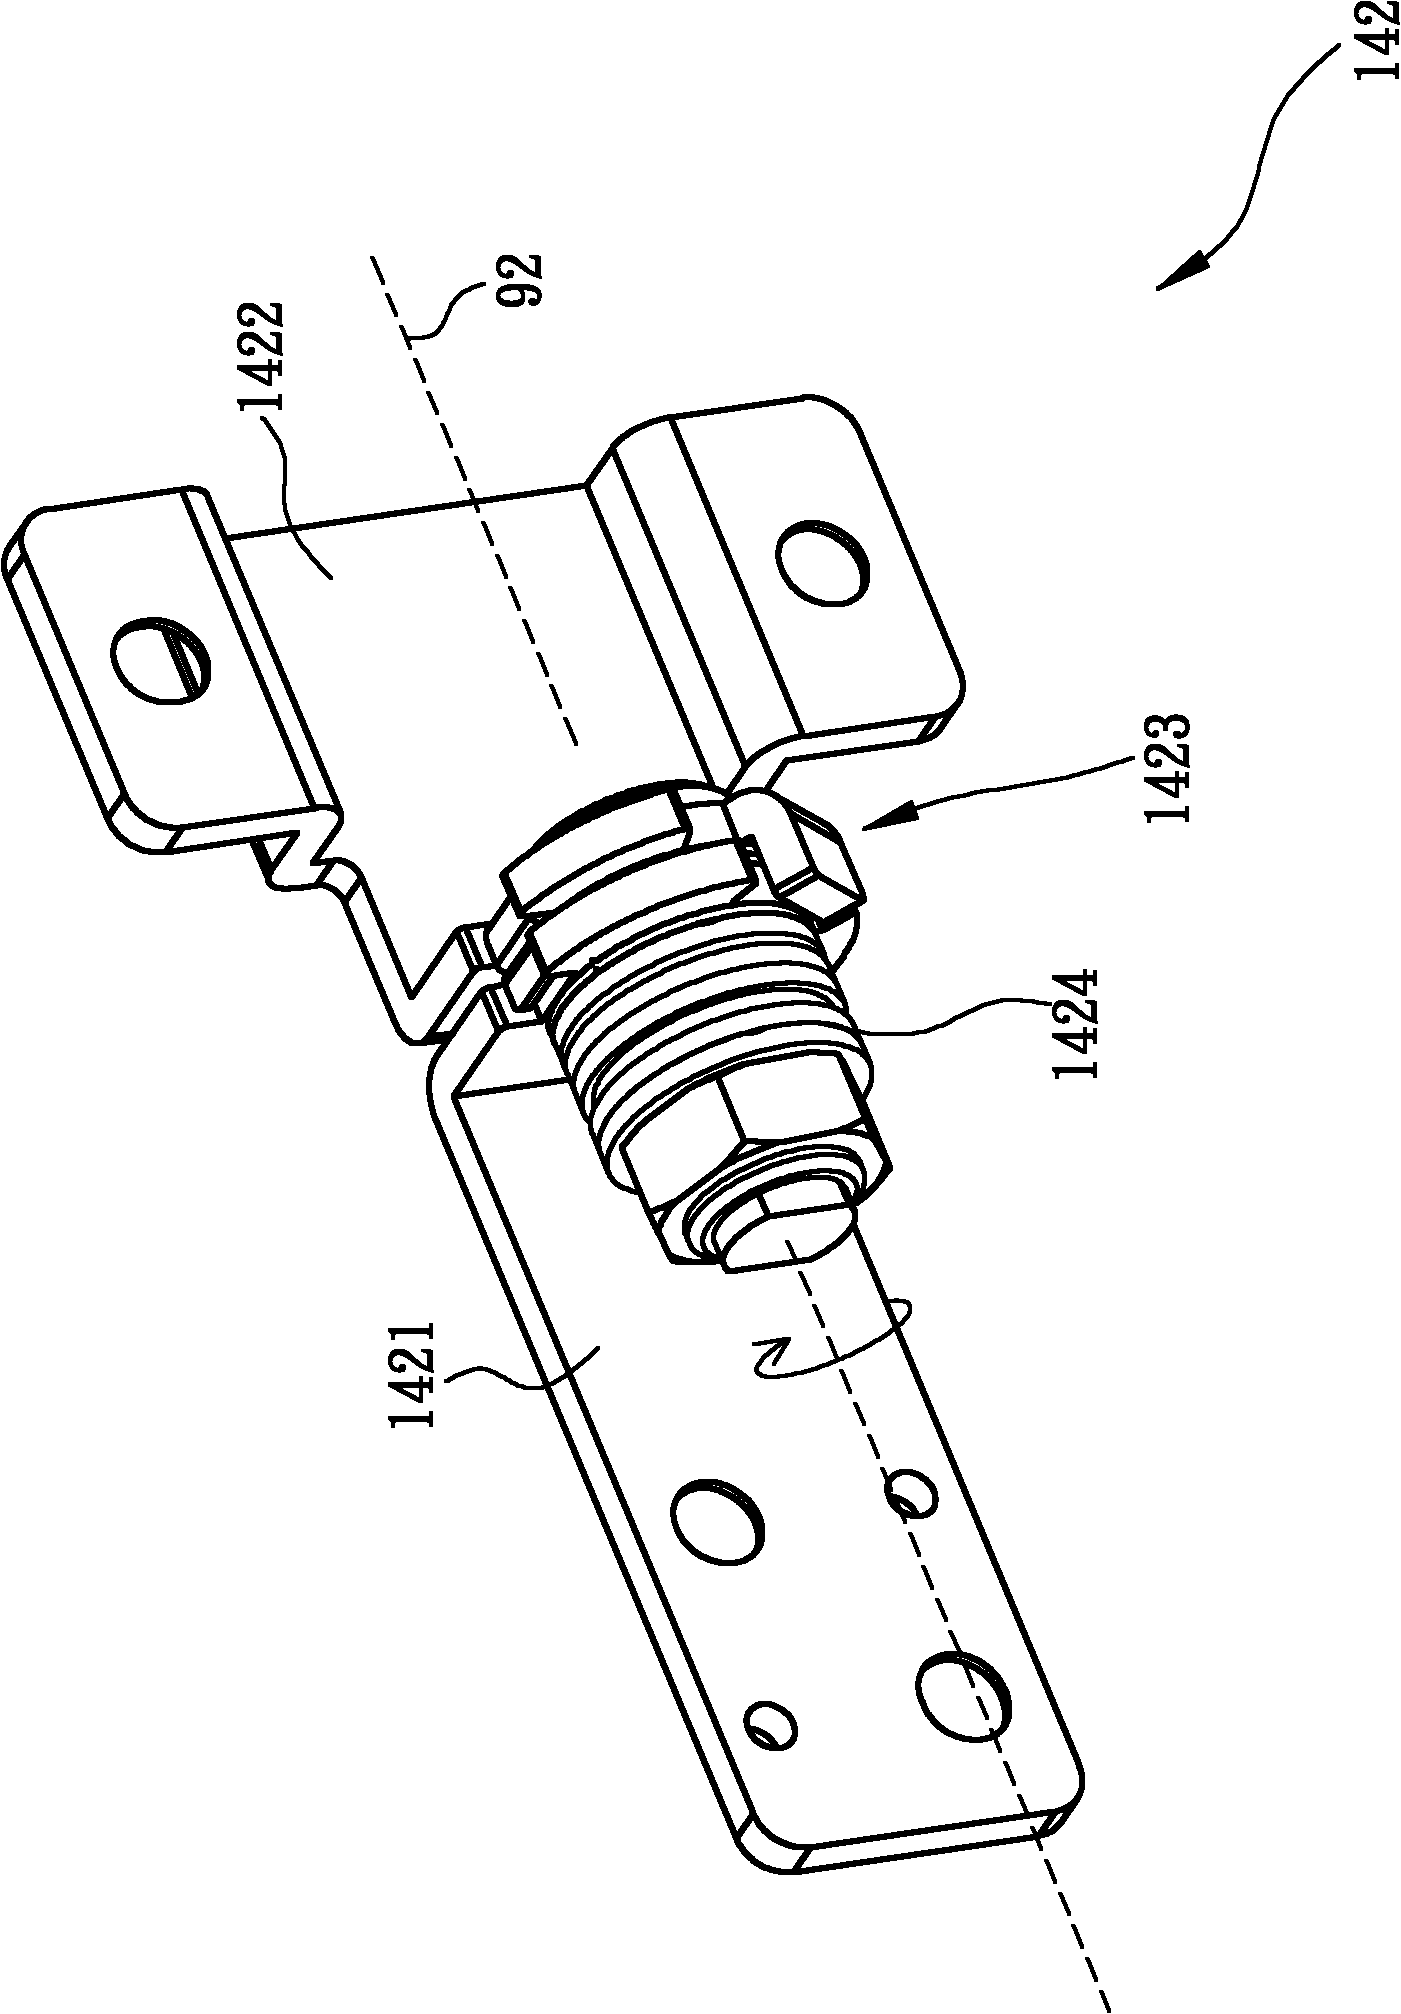 Rotating shaft structure of displays